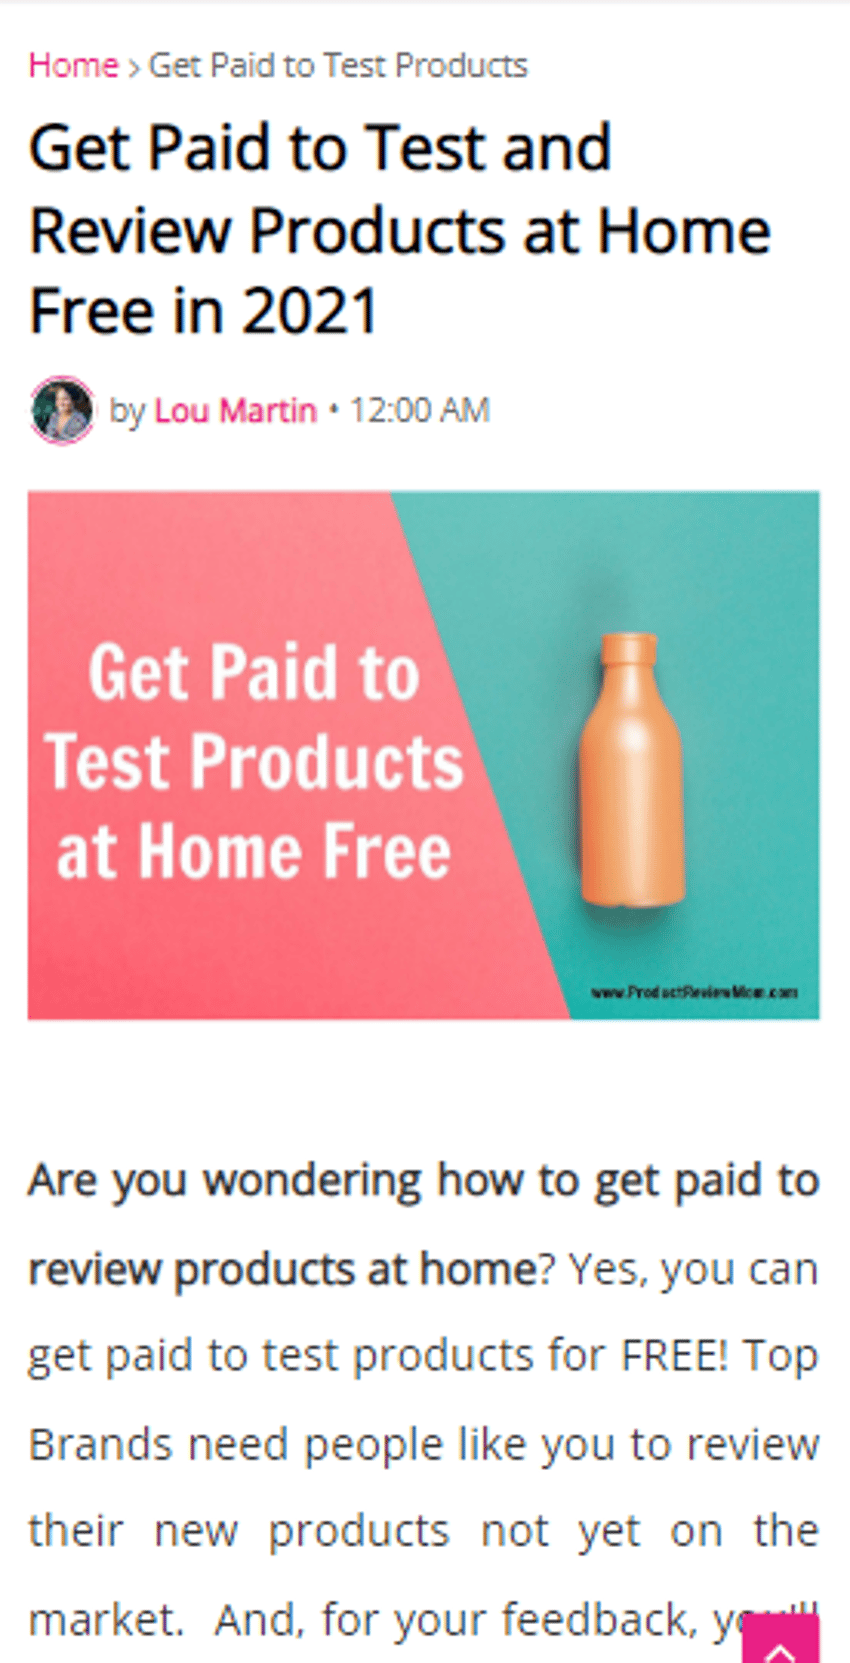 check out the full post [here](https://www.productreviewmom.com/2013/06/how-can-i-get-paid-to-test-products.html